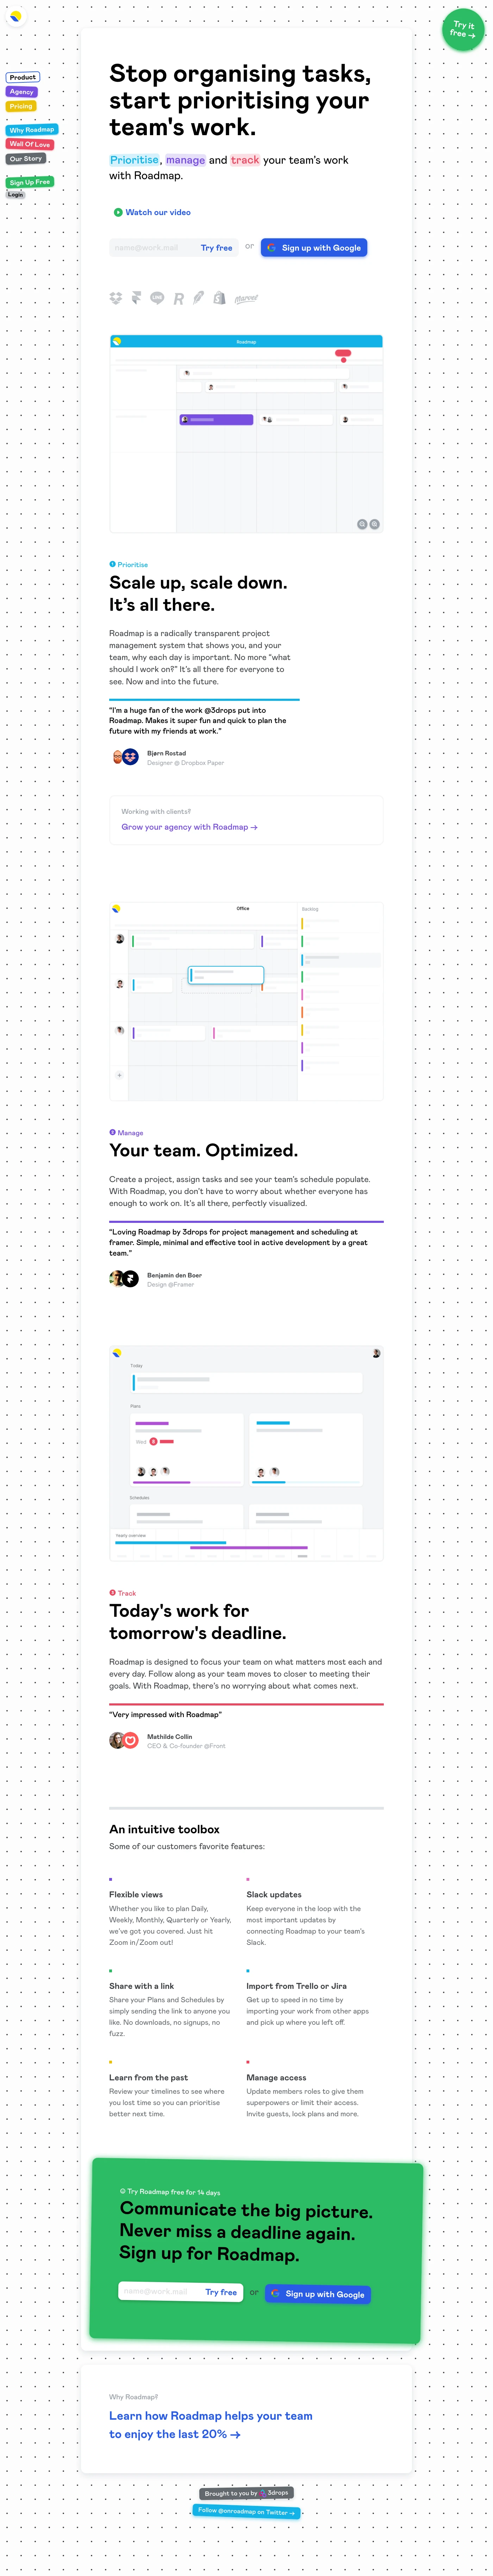 Roadmap Landing Page Example: Roadmap helps you to plan, manage and track your teams work by just drag and drop. Stop organising tasks, start prioritising your team's work.